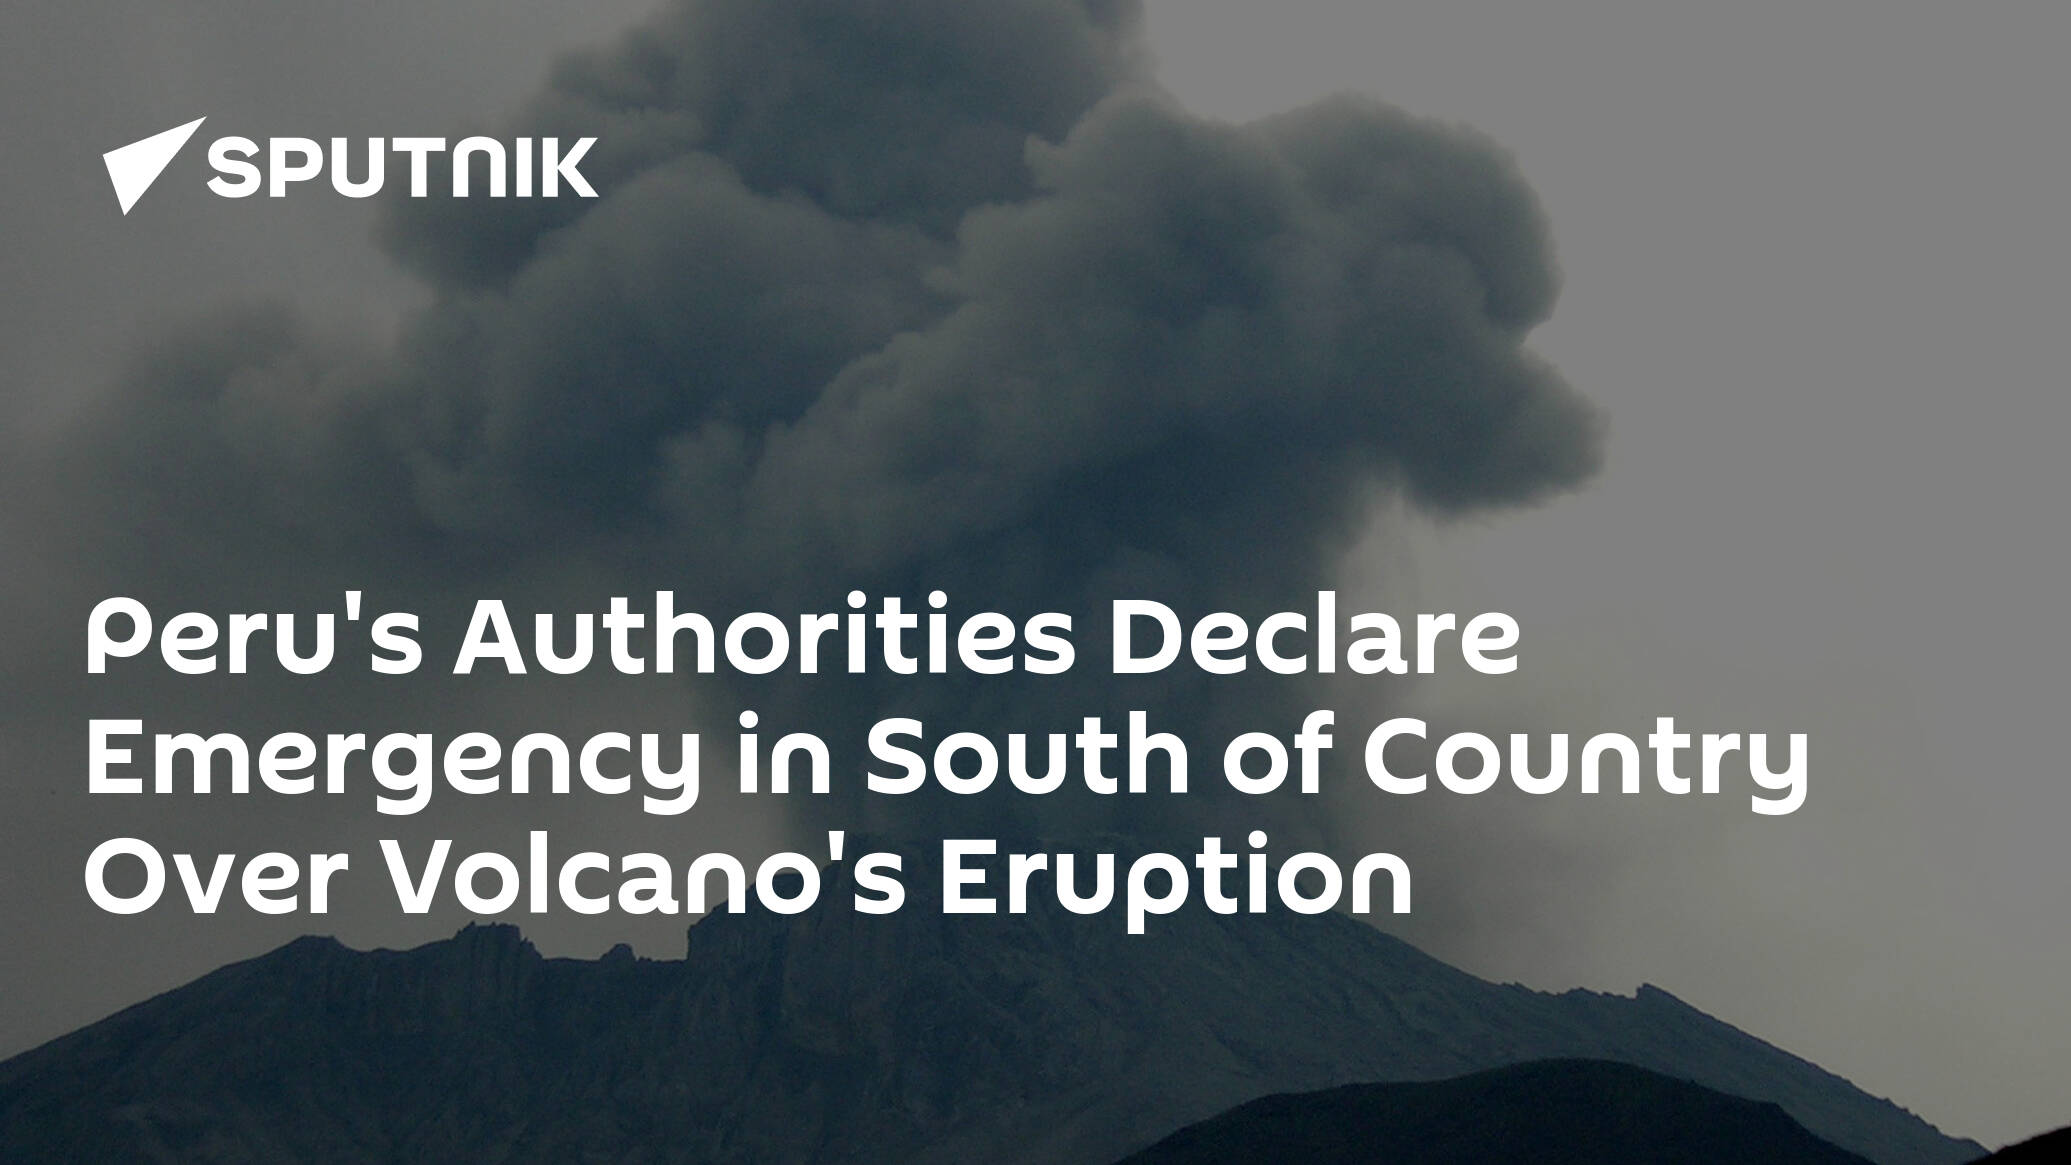 Peru's Authorities Declare Emergency in South of Country Over Volcano's Eruption